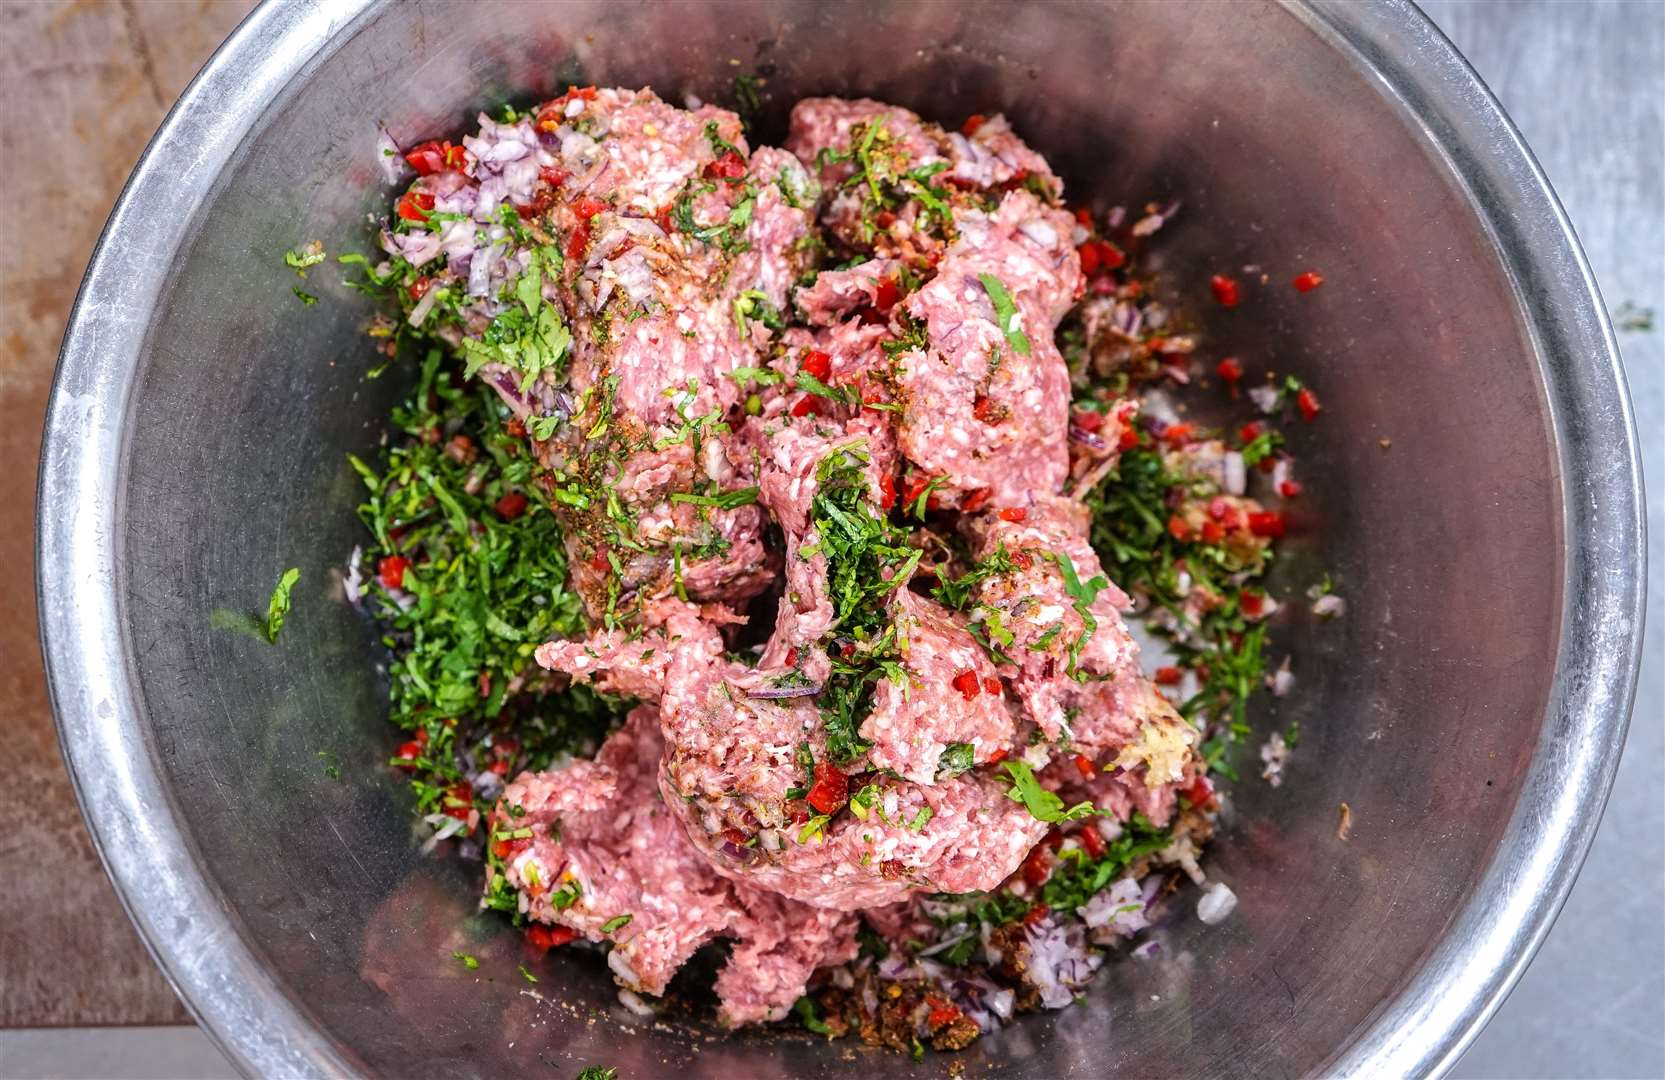 The ingredients mixed for the lamb kofta